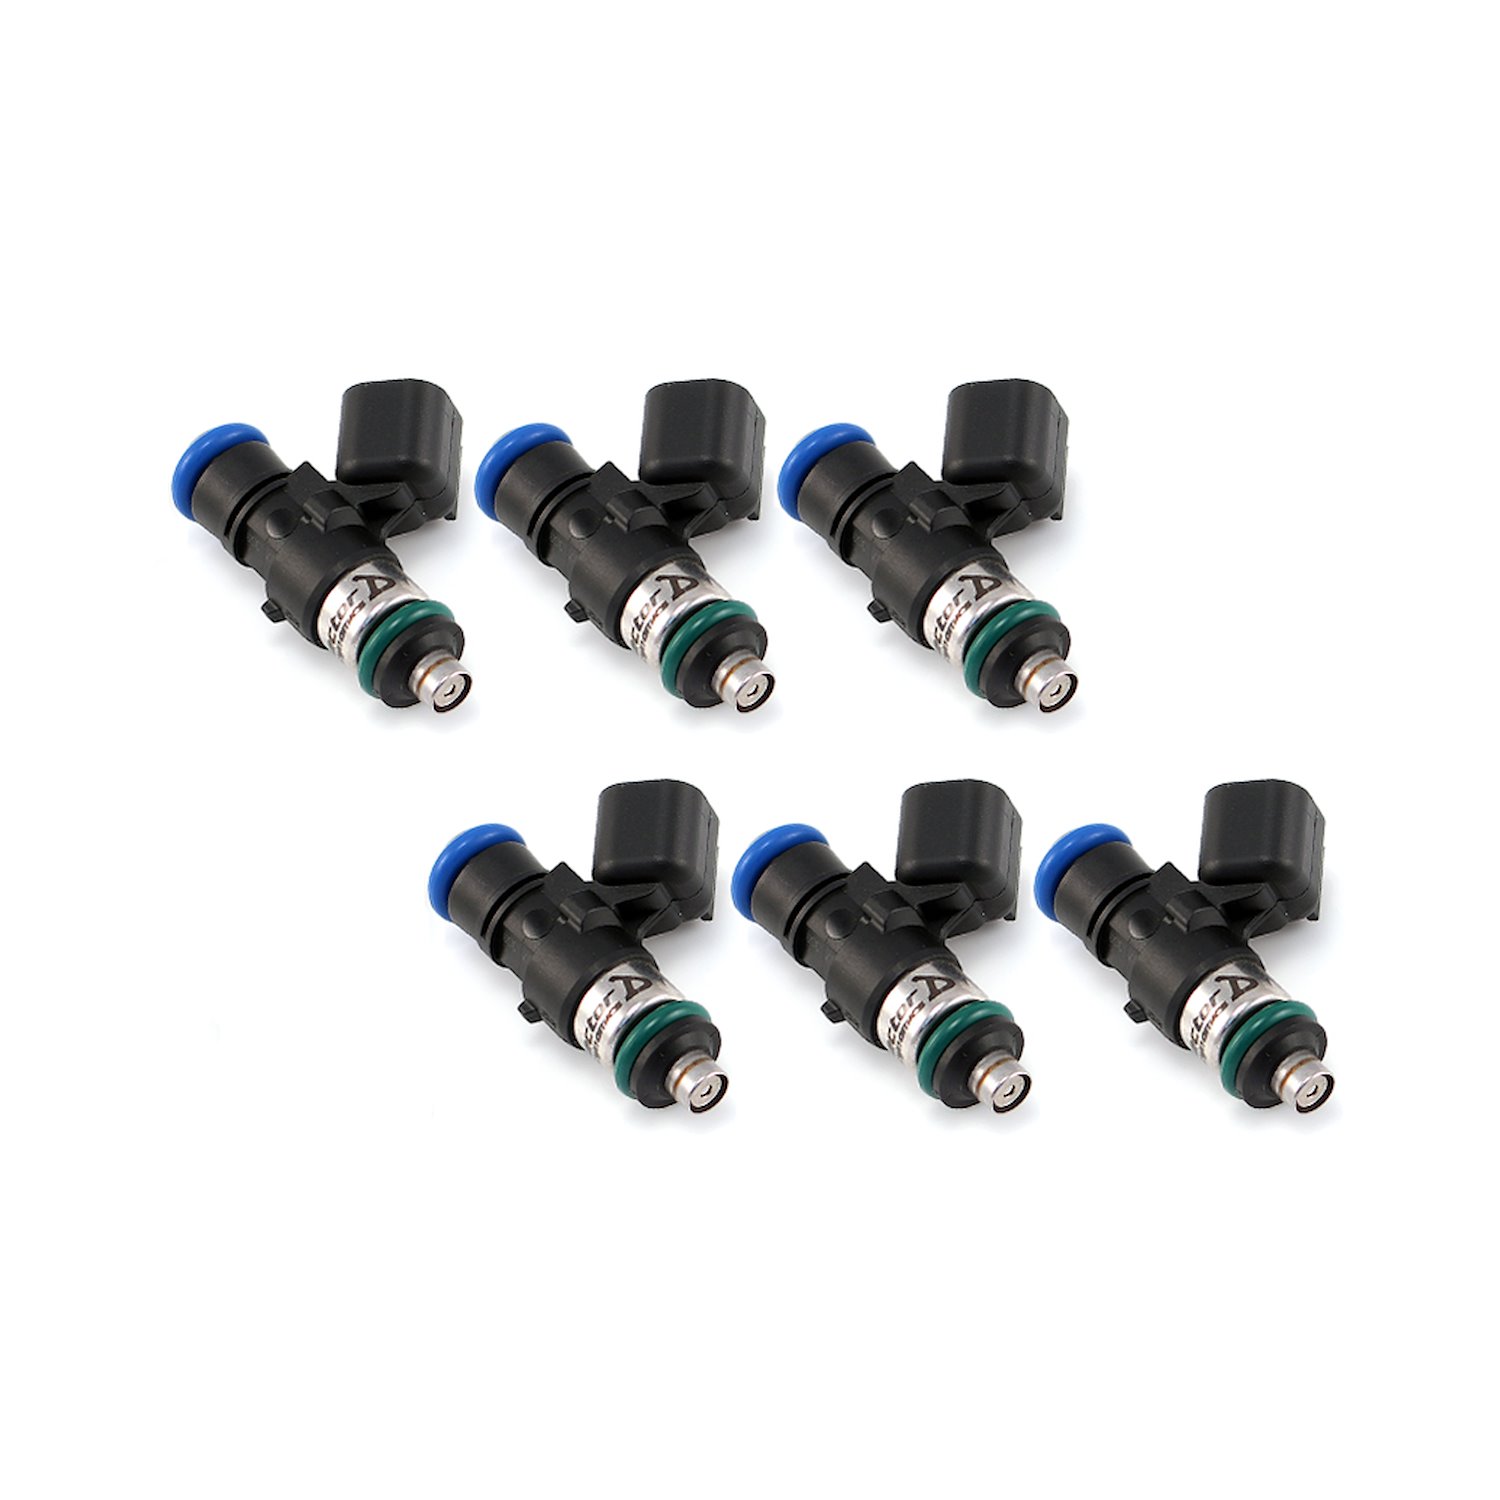 1300.34.14.14.6 1340cc Fuel Injector Set, 34 mm Length (No Adaptor Top), 14 mm Upper O-Ring / 14 mm Lower O-Ring